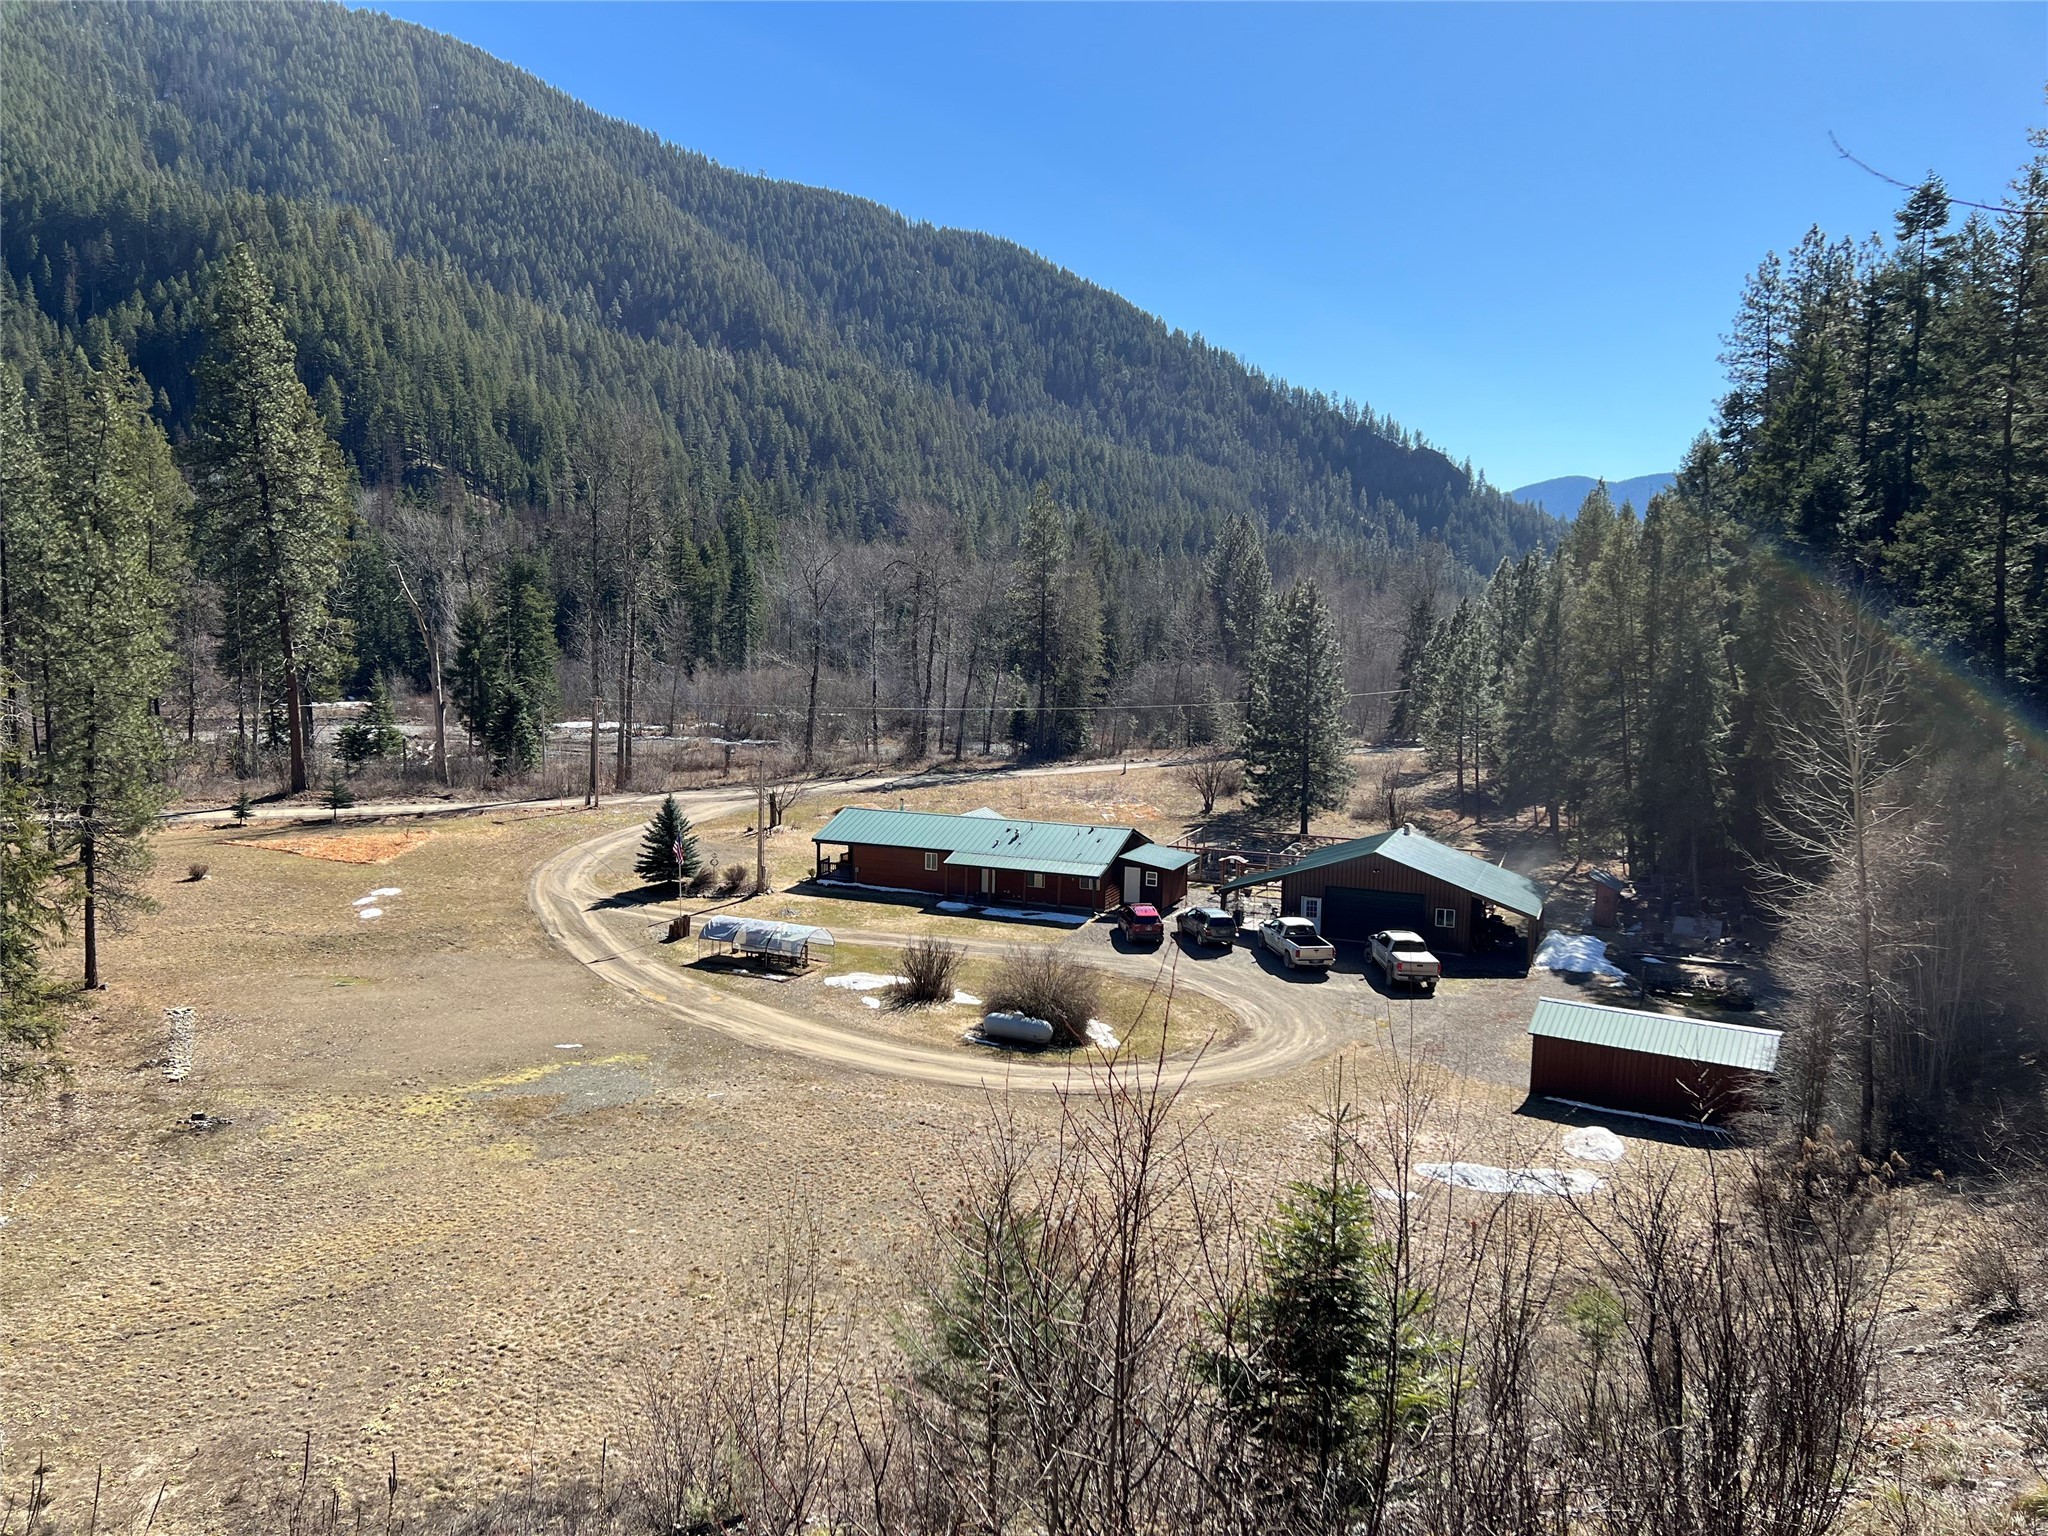 This 3.15 acre parcel is nestled against the backdrop of the Kootenai National Forest on three sides of the property with approximately 240ft of pristine water frontage along the Vermilion River. This 1,280 sqft, 3 bedroom, 2 bath manufactured home offers an unparalleled opportunity to immerse yourself in the mountains. With no covenants, you can step outside your door and into a world of outdoor adventure, with hunting, fishing, hiking, snowmobiling and side-by-side trails right at your fingertips. The 30x30 shop provides ample space for pursuing hobbies, storing outdoor gear/equipment, or for parking. There are two RV hook-ups on the property, a 12x24 shed, and a 8x16 shed that has electricity to it. The water source is a spring. The fenced garden has perennial vegetables in raised beds, apple & cherry trees and numerous fruiting bushes. This property is located one mile from the Clark Fork River & boat launch. Call Allison Aumiller at 406-242-0956, or your real estate professional.